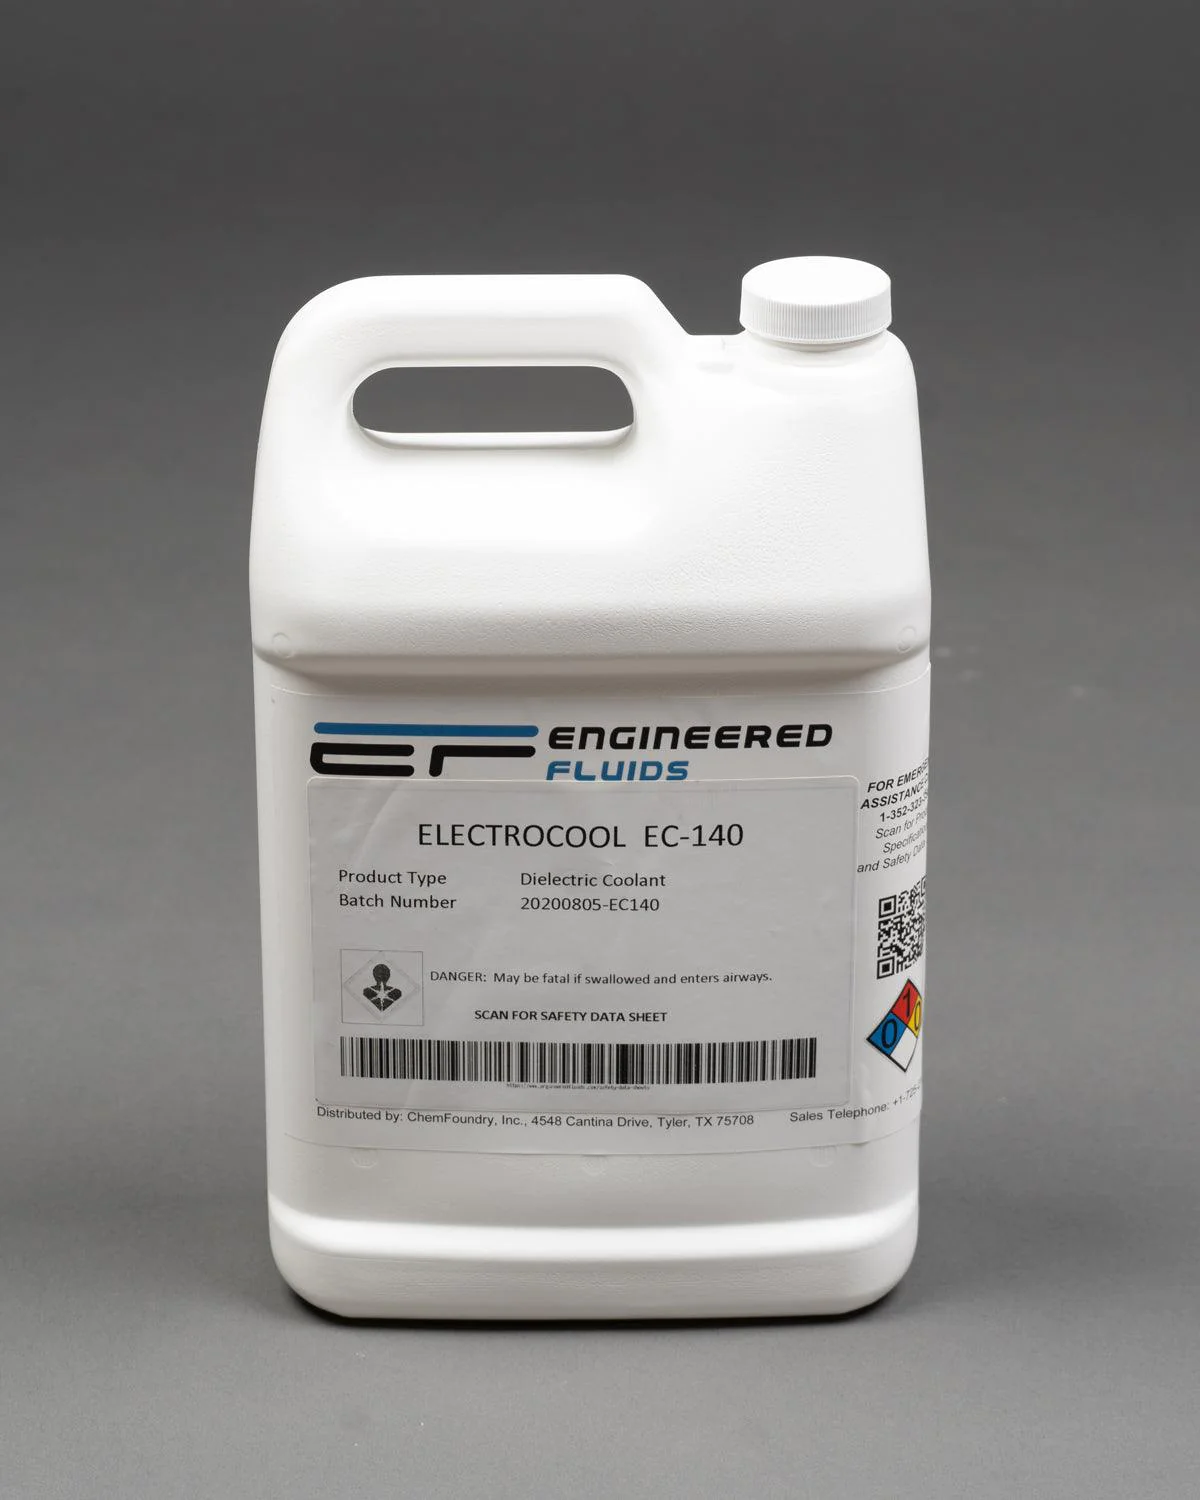 ElectroCool® EC-140 Dielectric Coolant Questions & Answers